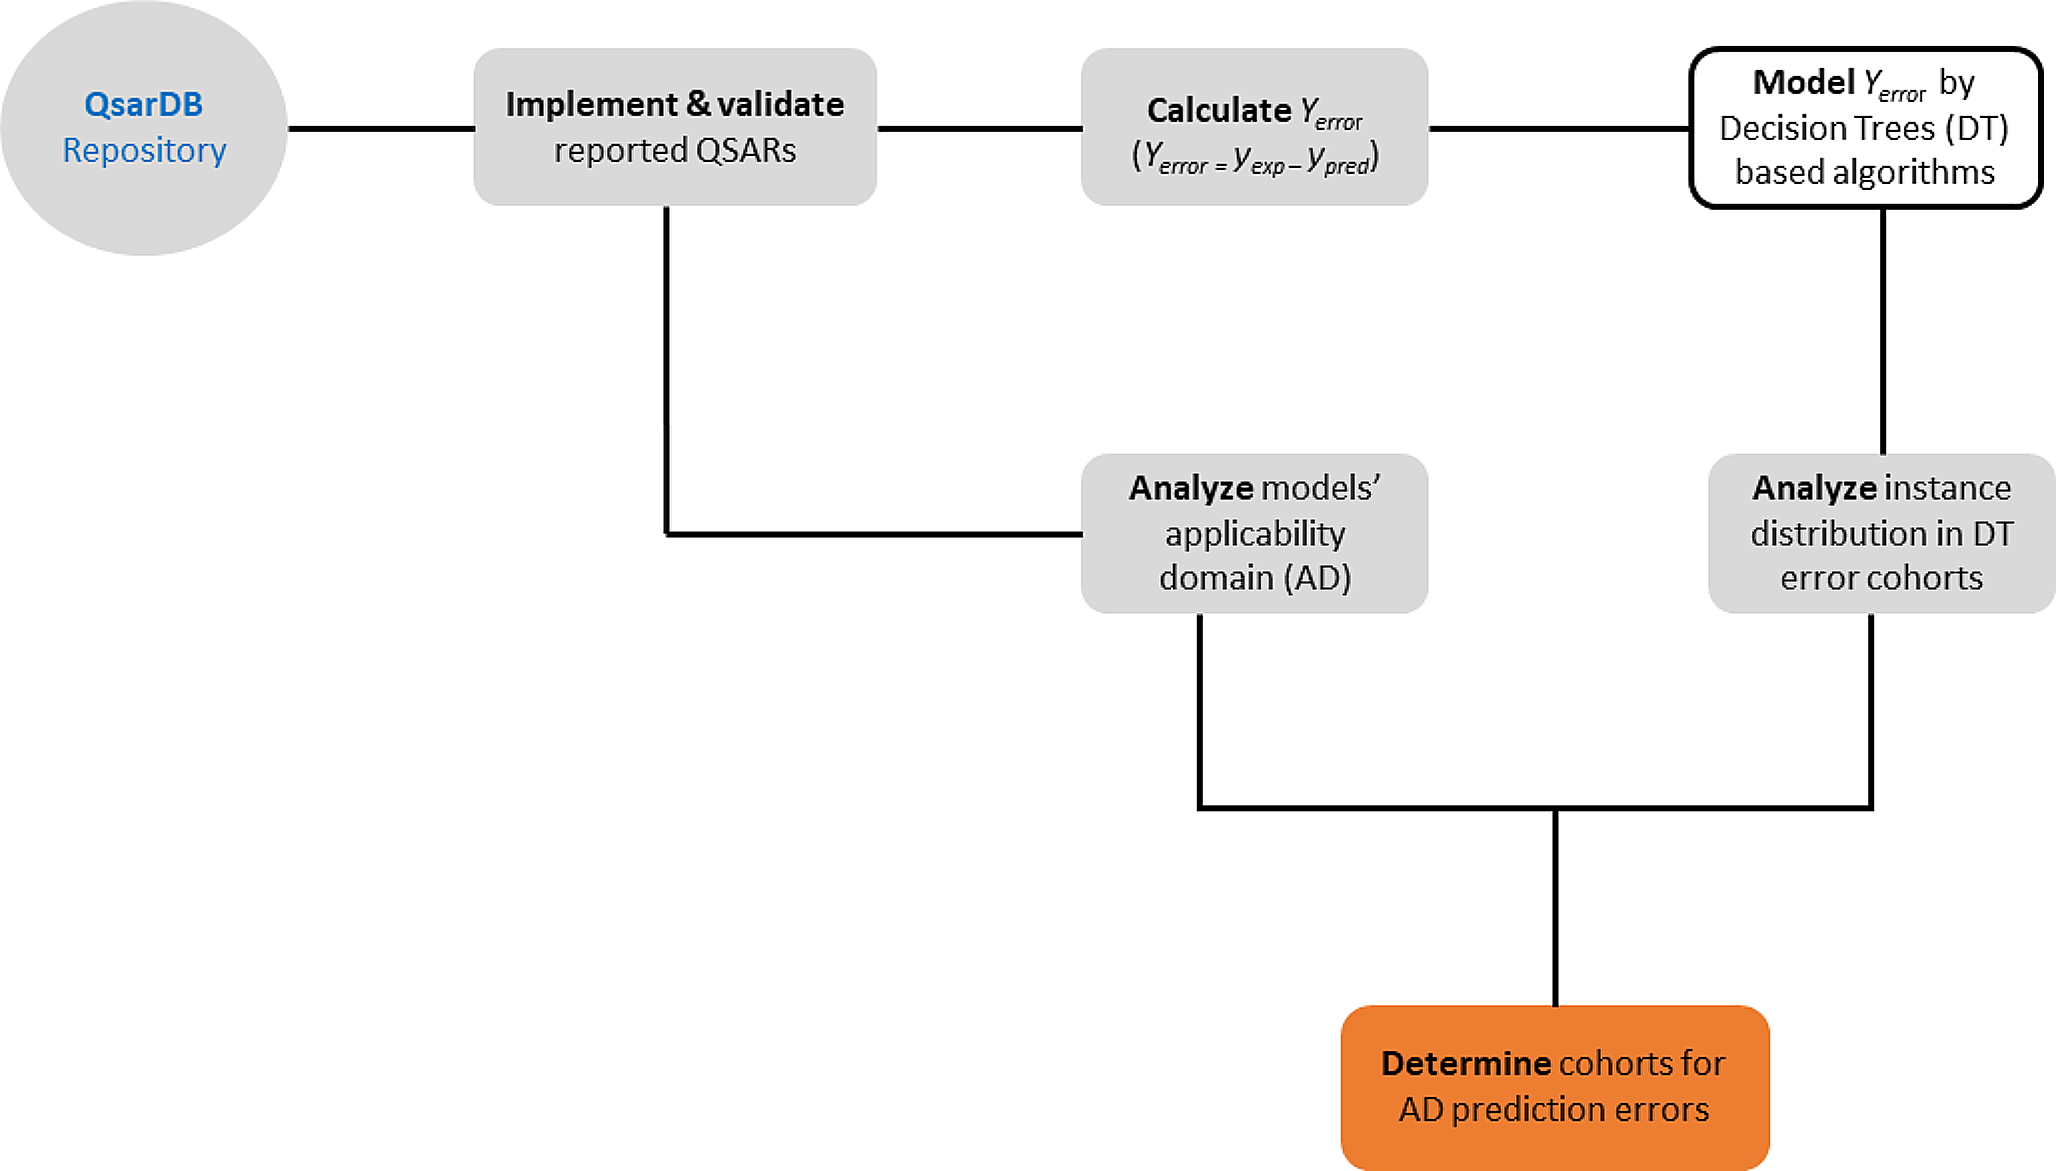 Rethinking the applicability domain analysis in QSAR models